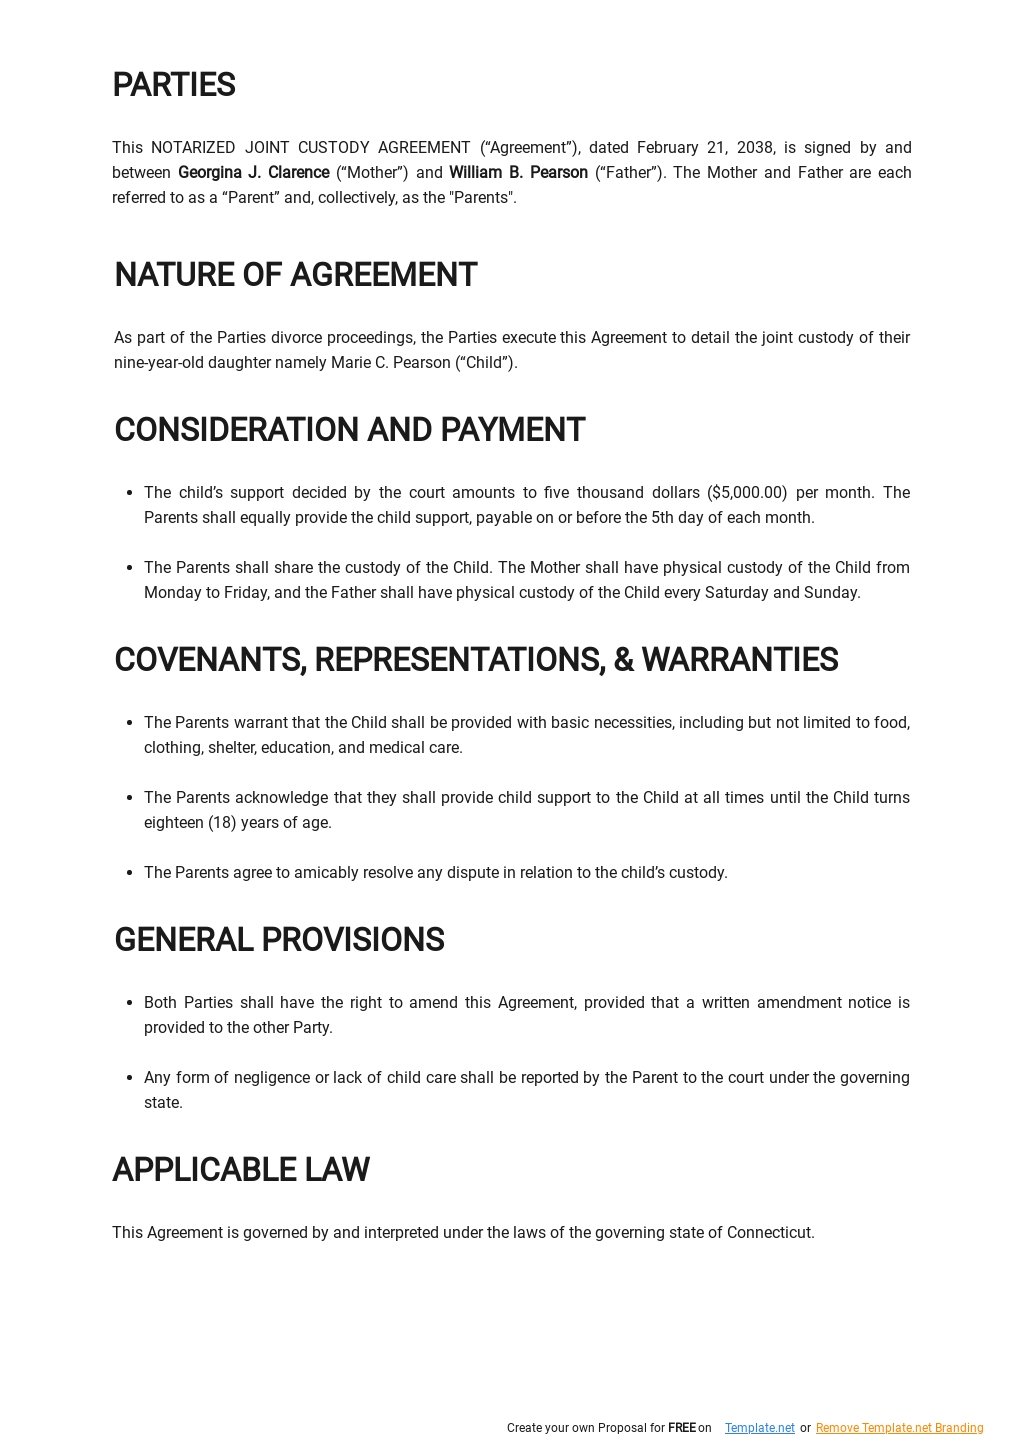 Notarized Joint Custody Agreement Template - Google Docs, Word In notarized custody agreement template